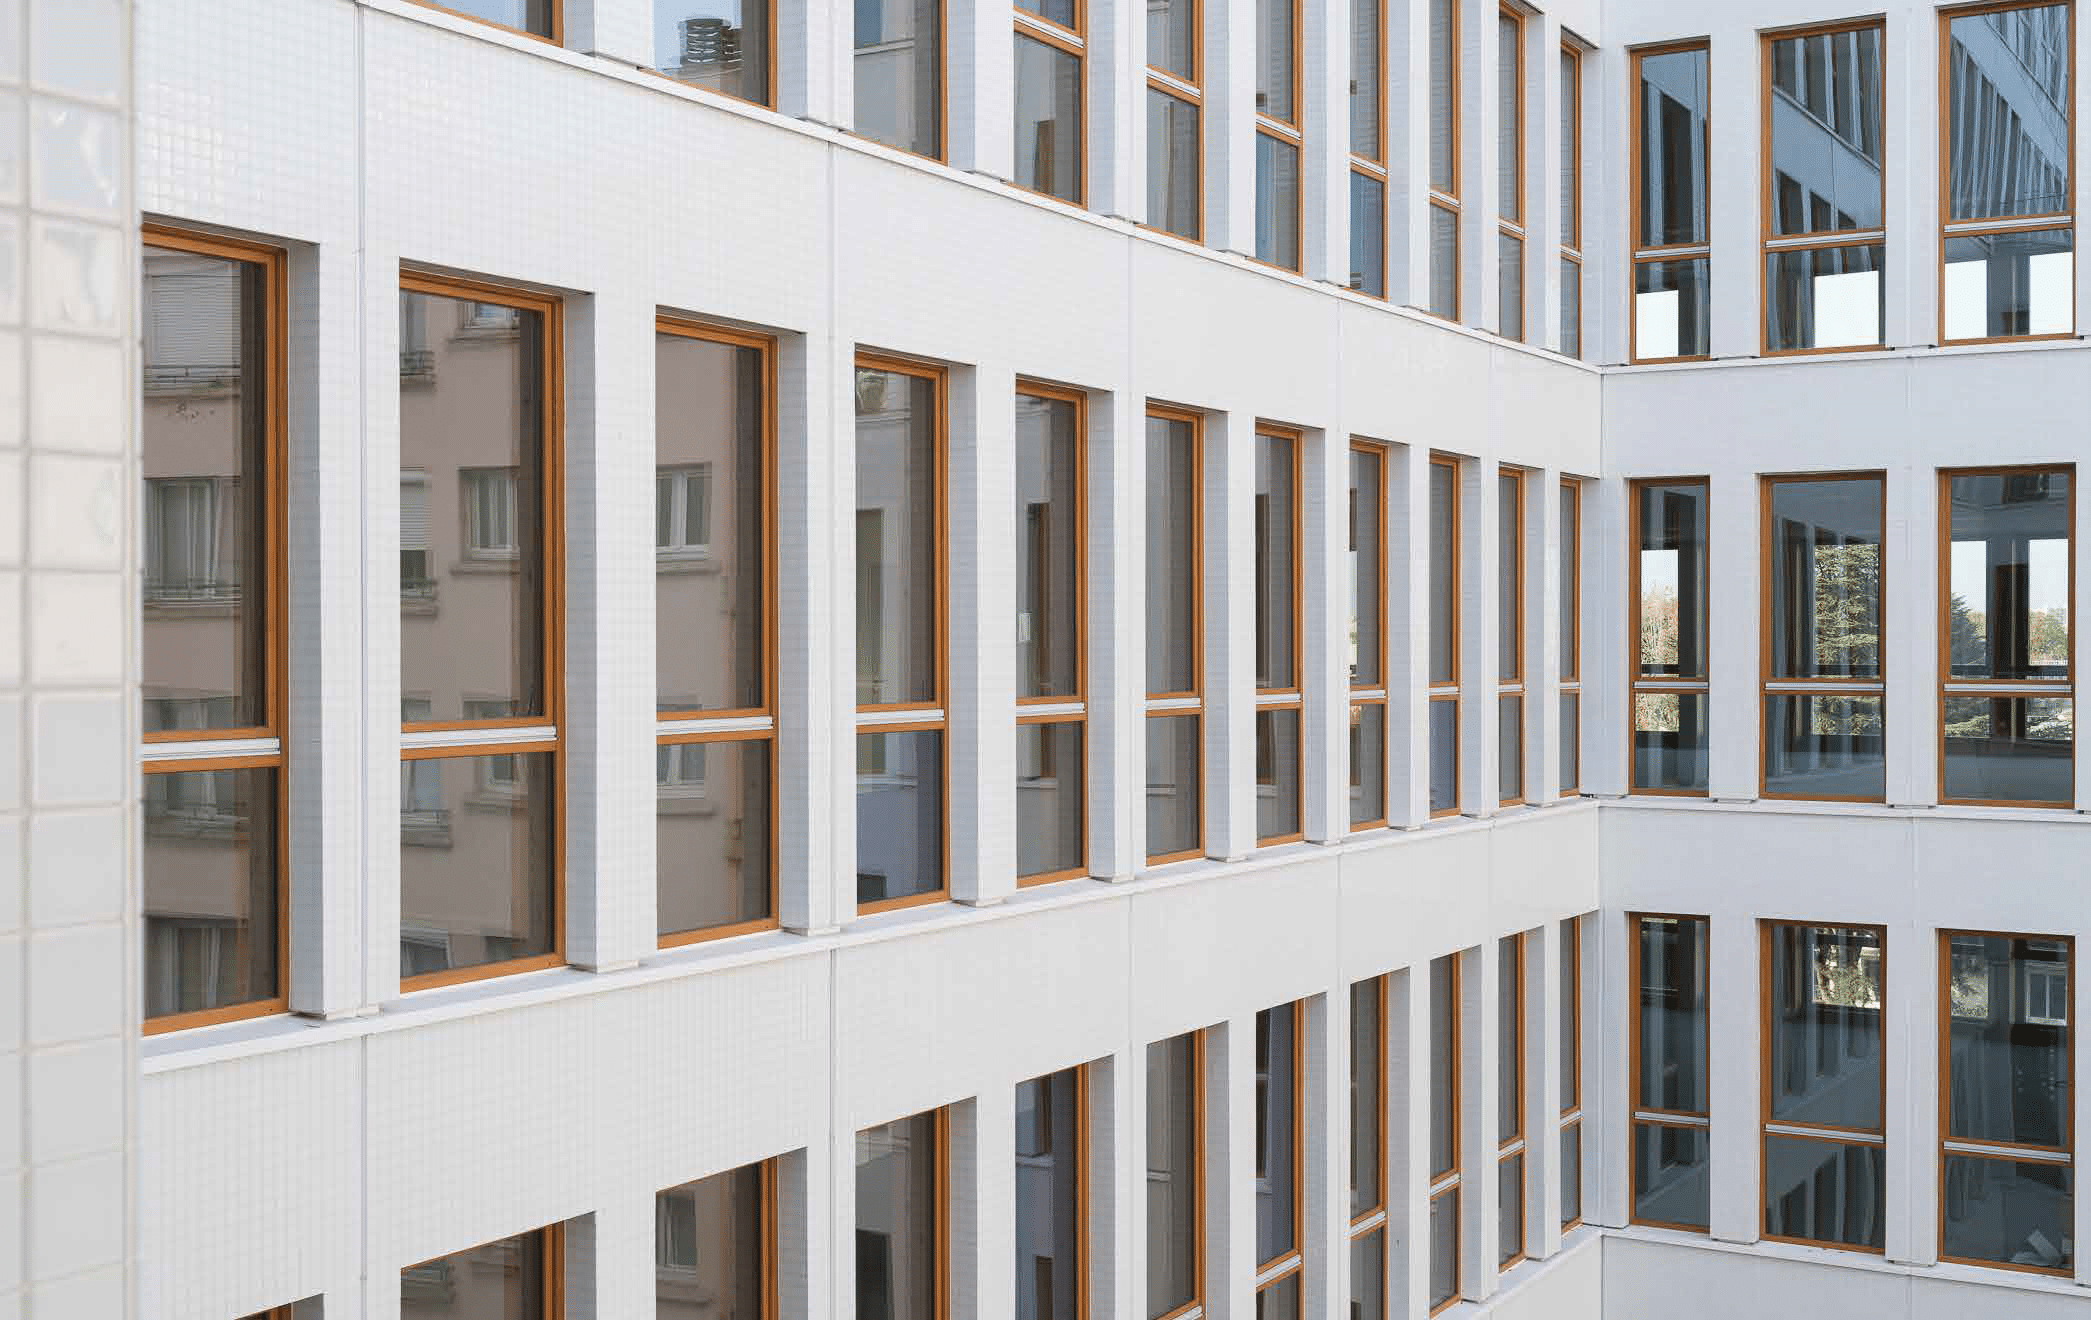 10,800 sq.m of low-carbon and circular economy offices